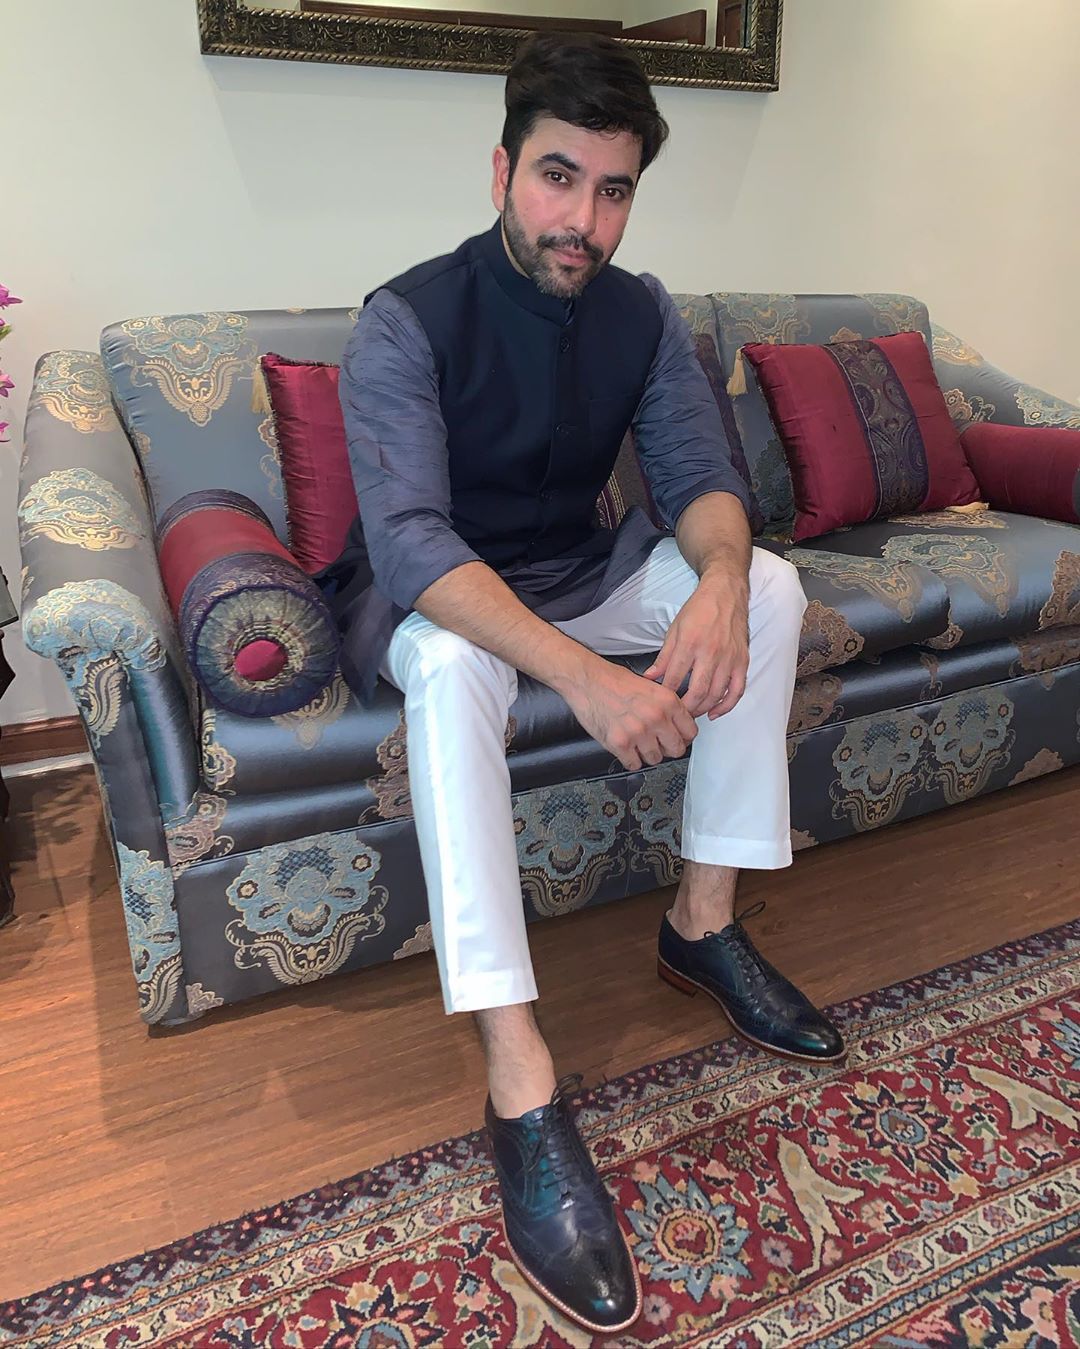 Pakistani Celebrities Pictures from Eid-ul-Fitr 2020 - Day1 - Part1